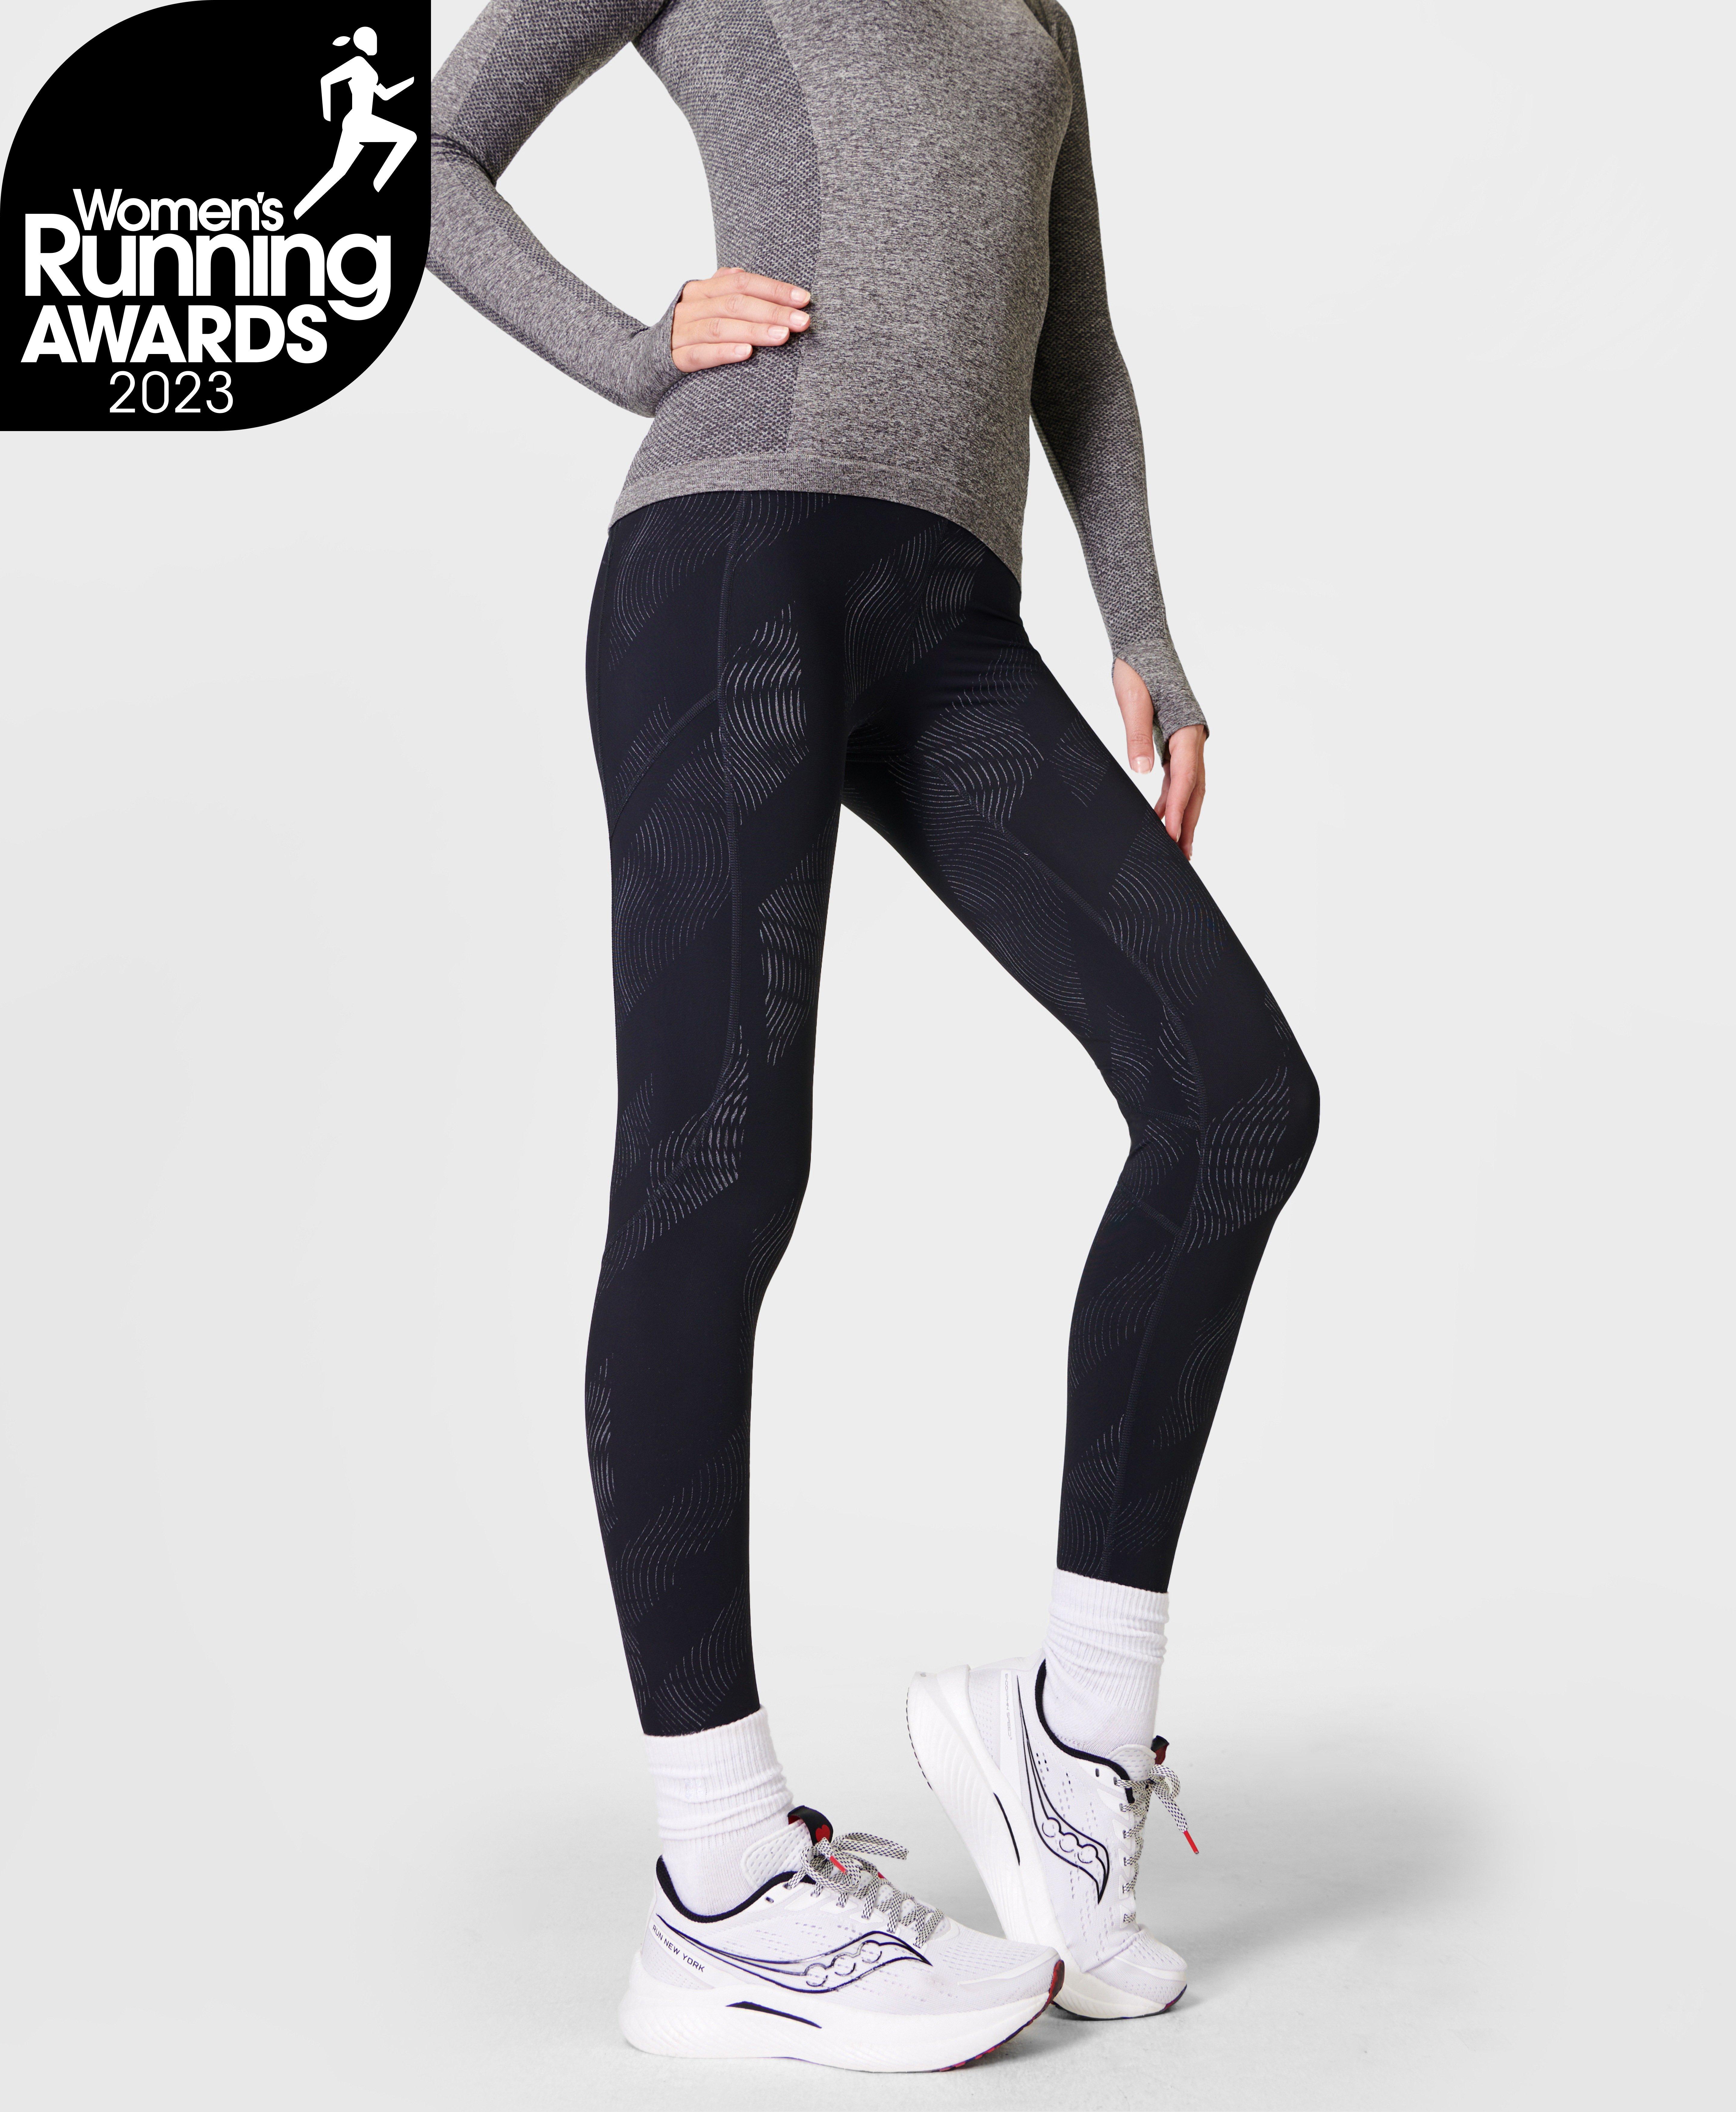 The Nike Printed Reflective Women's Running Tights.